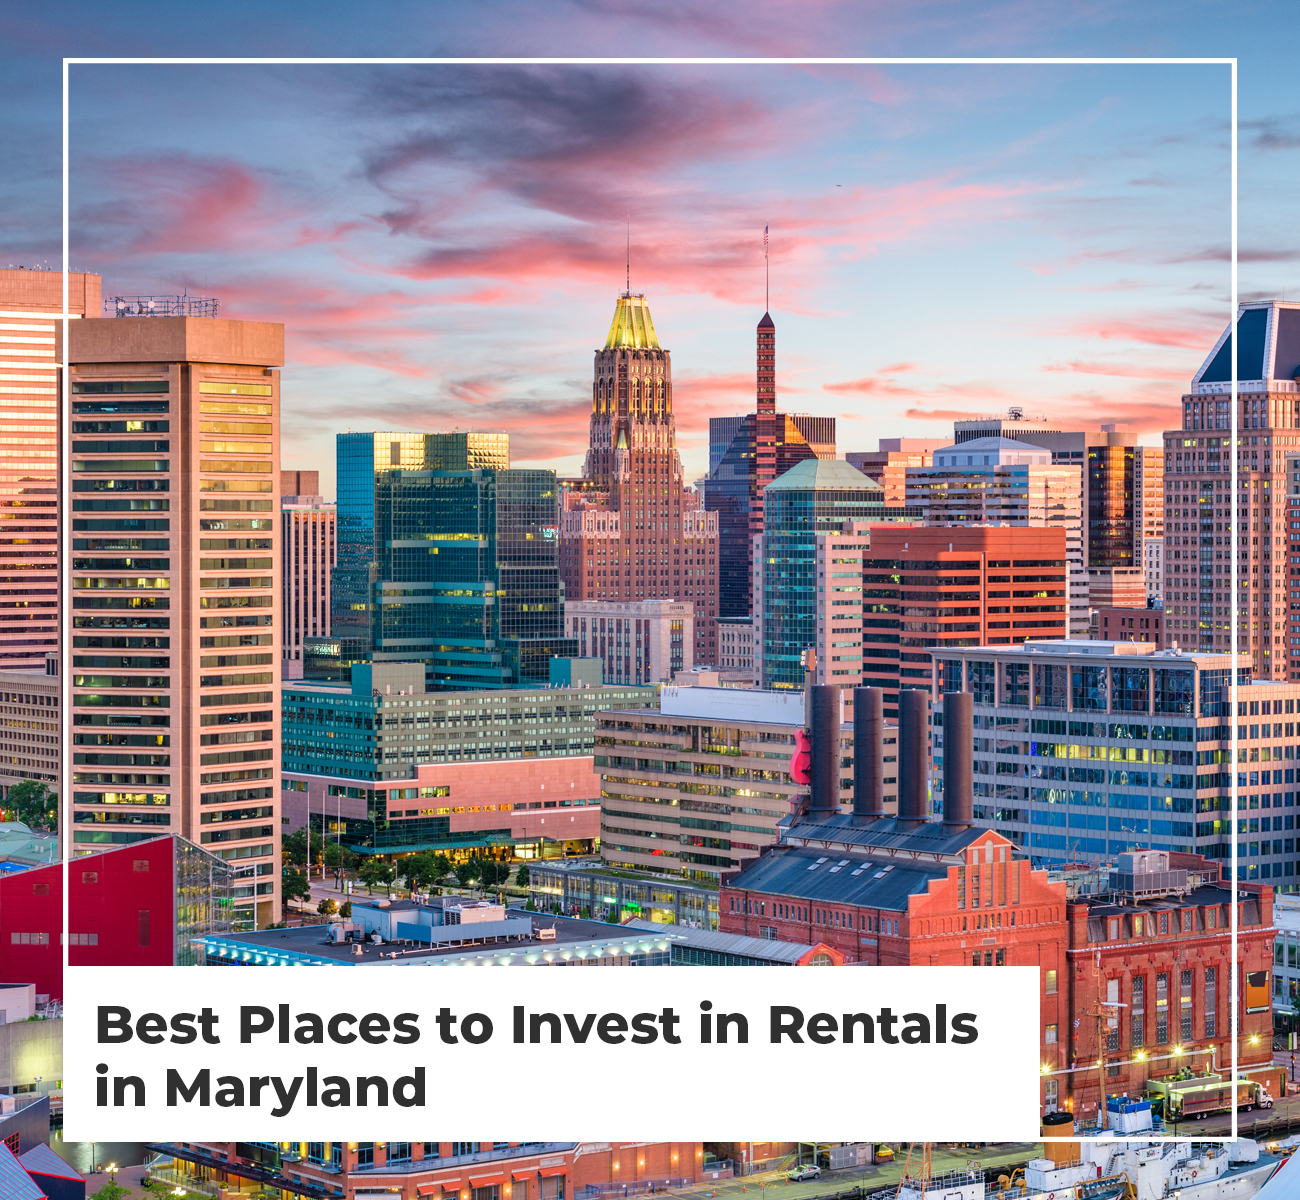 Best Places to Invest in Rentals in Maryland